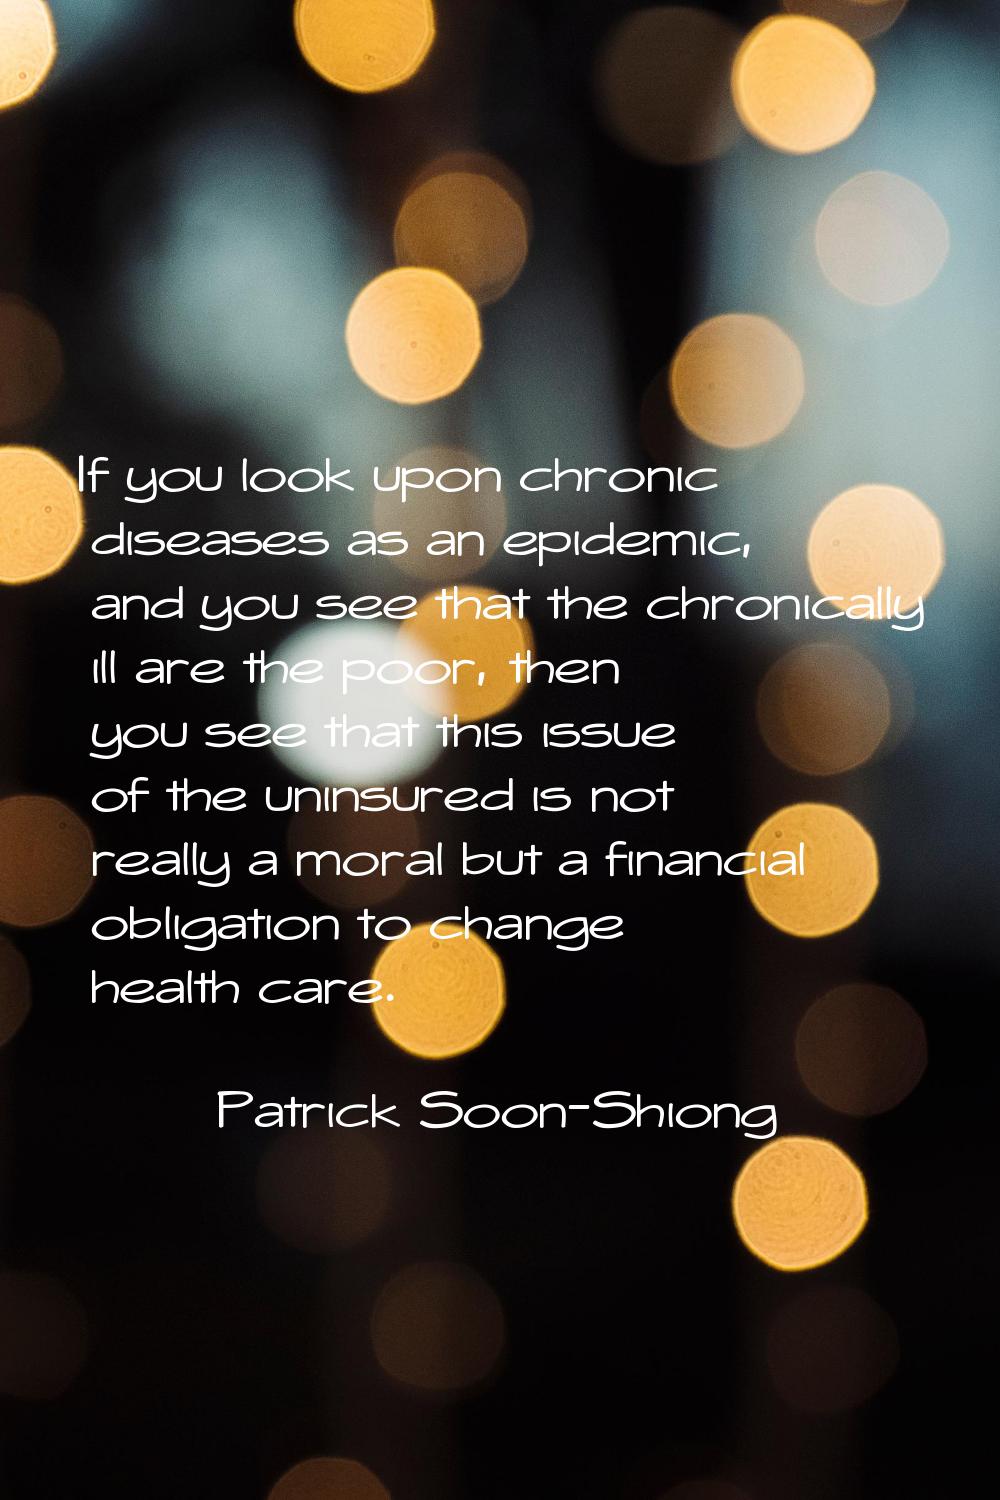 If you look upon chronic diseases as an epidemic, and you see that the chronically ill are the poor